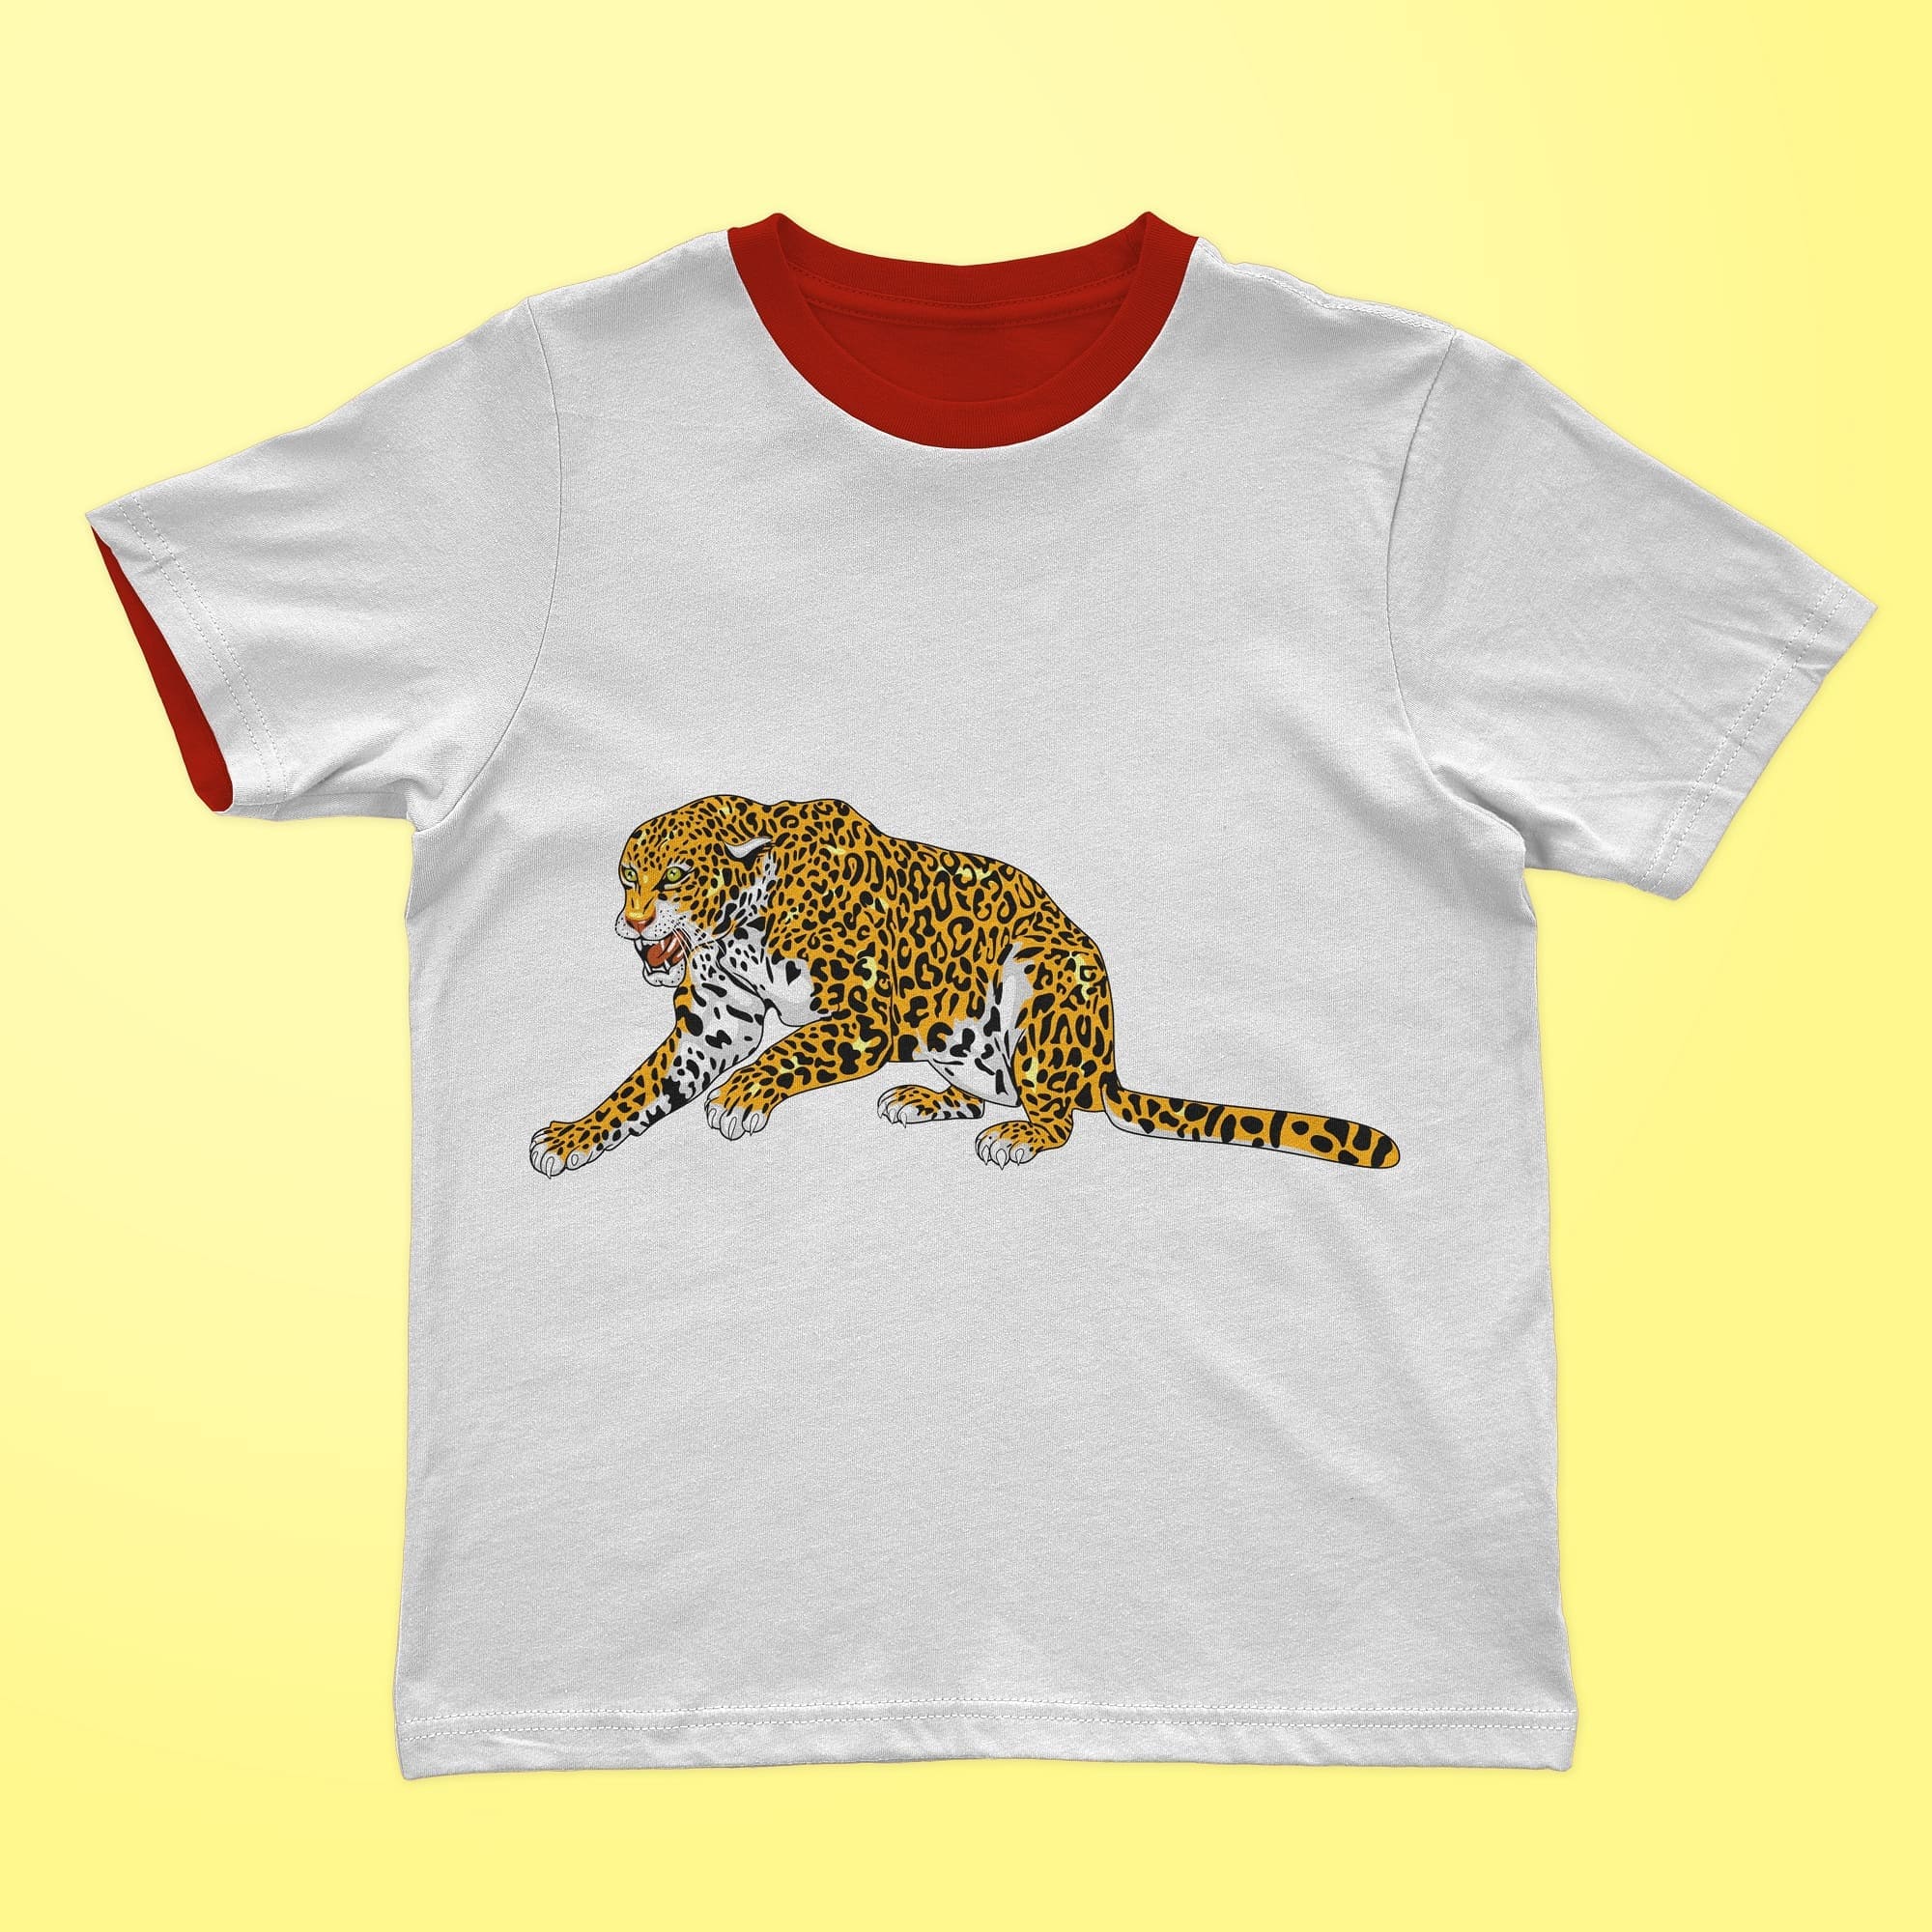 Cool t-shirt with a print of an attacking leopard.